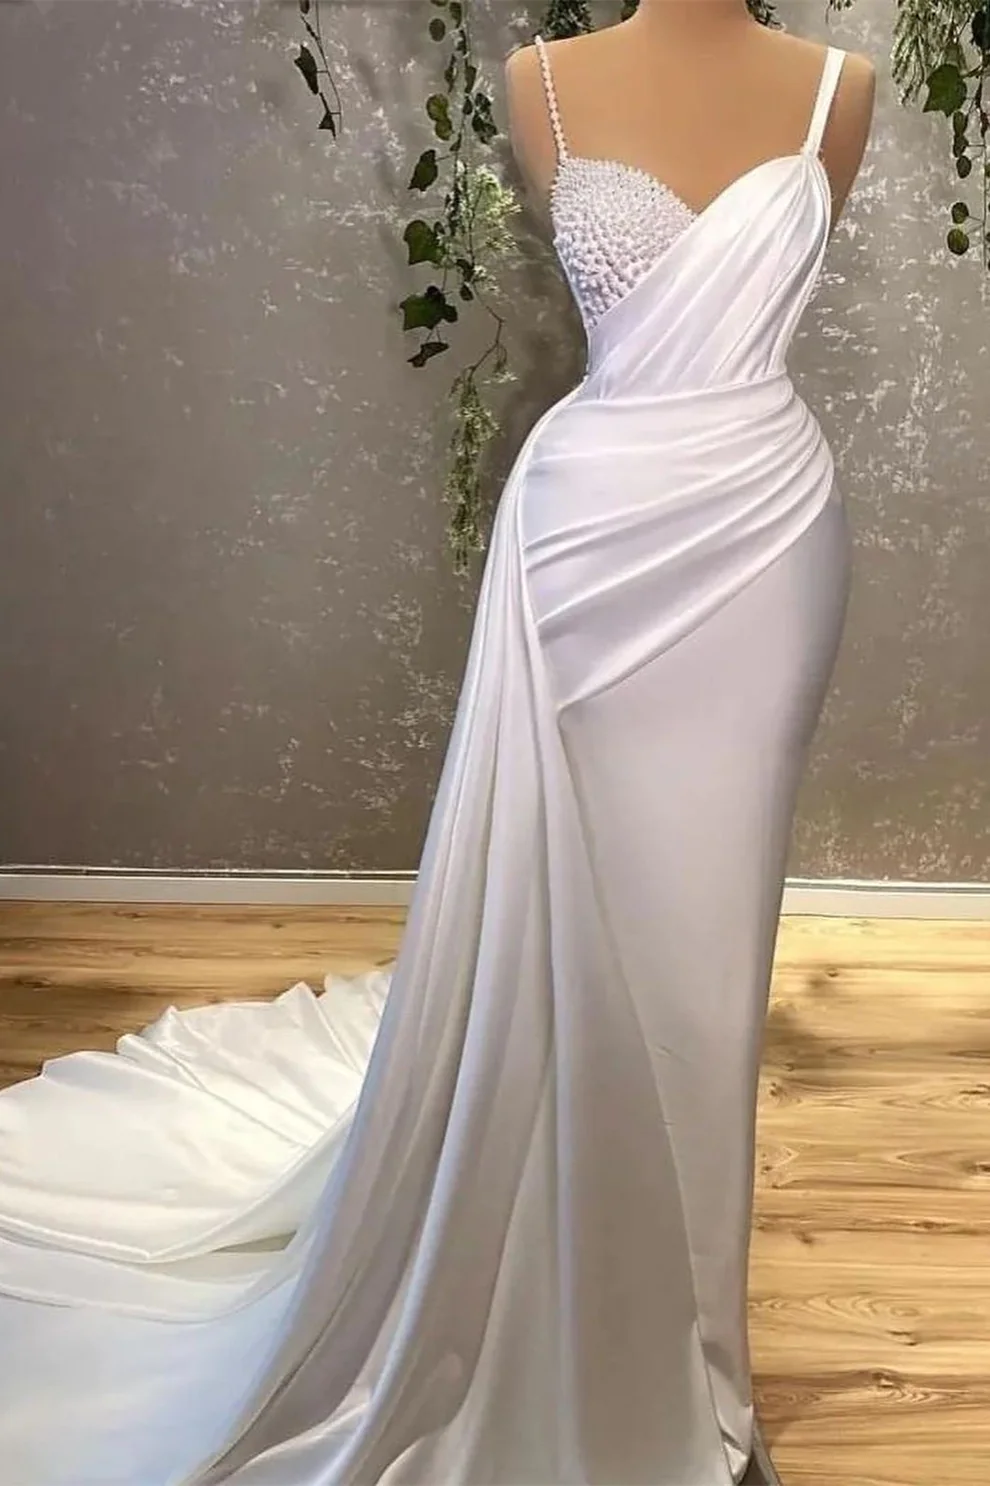 White Spaghetti Strap Mermaid Evening Dress Long With Pearls nv853